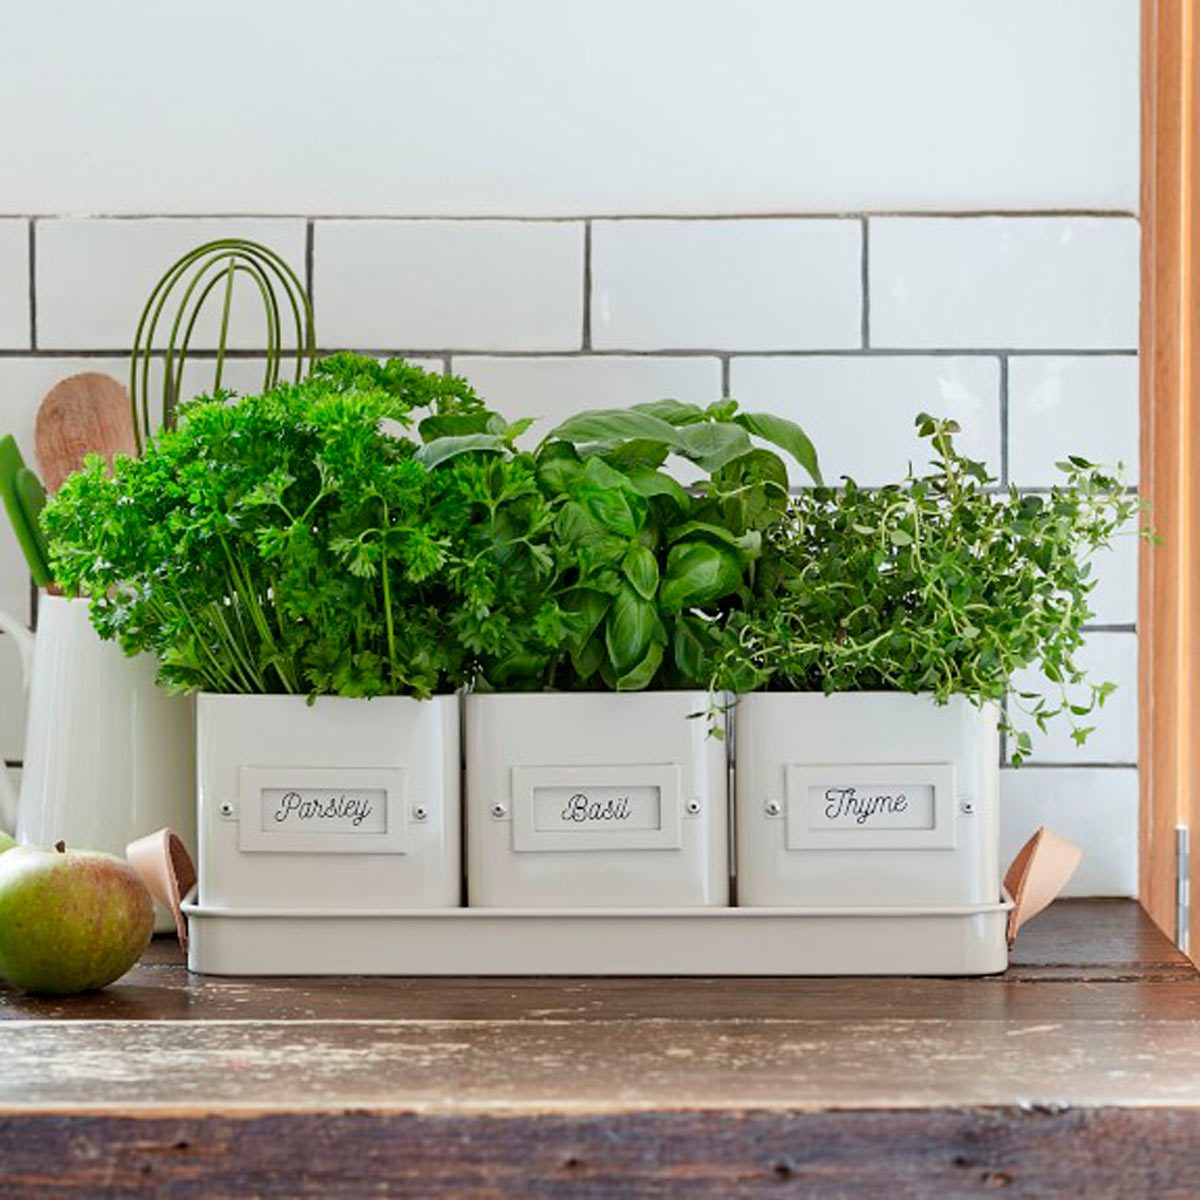 10 Charming Indoor Herb Garden Planters Family Handyman The Family